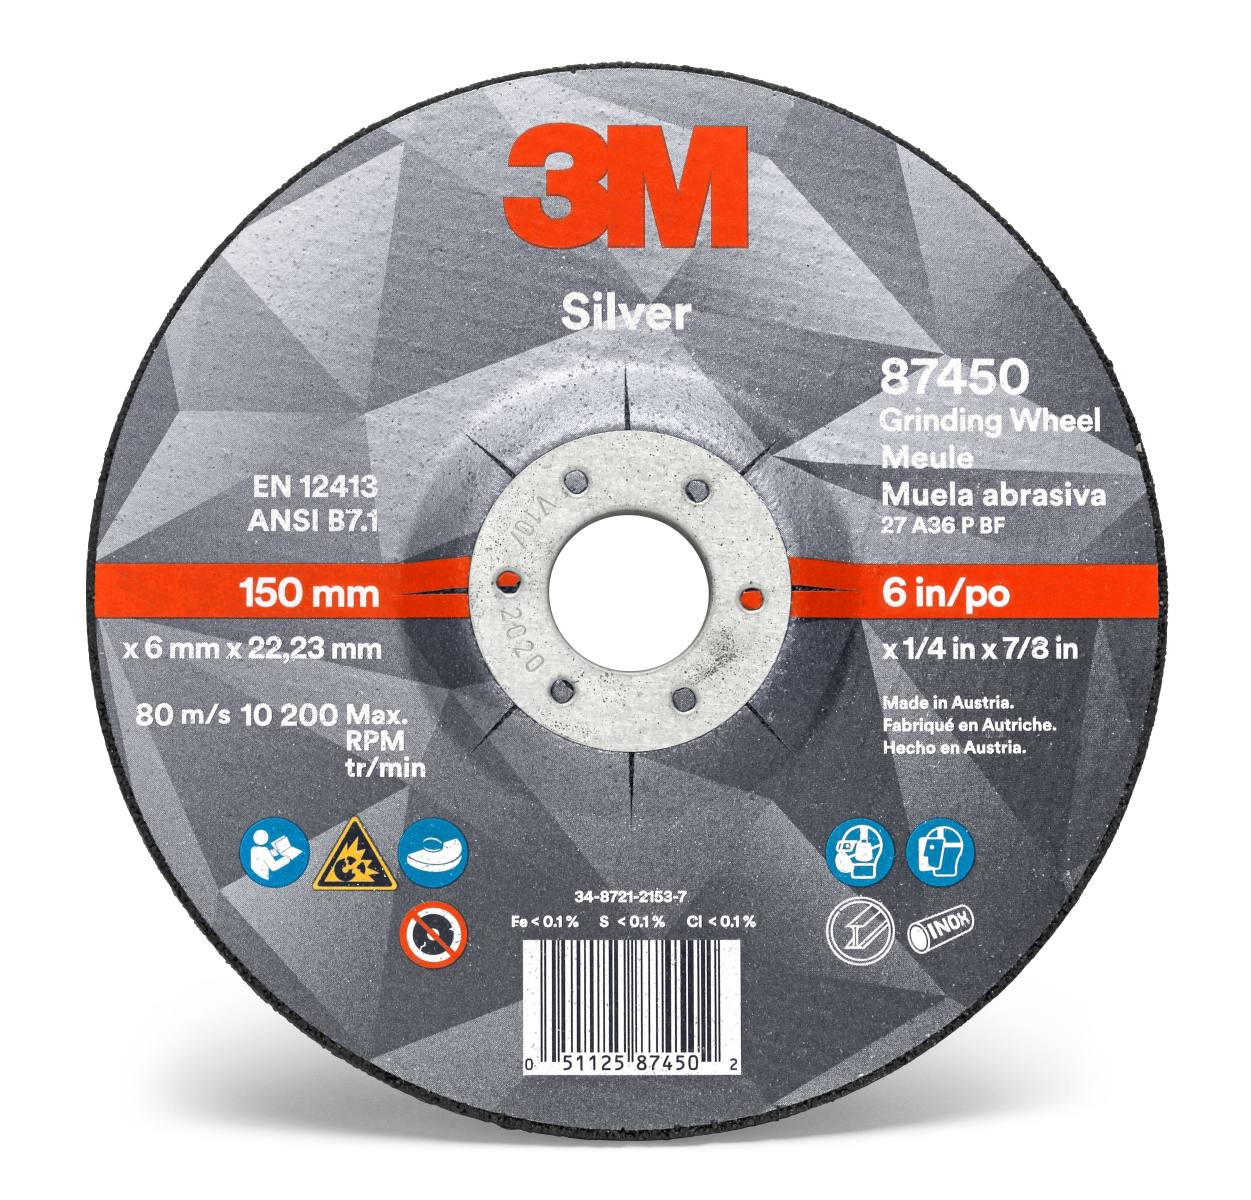 3M Silver grinding disc, 150 mm, 7.0 mm, 22.23 mm, type 27